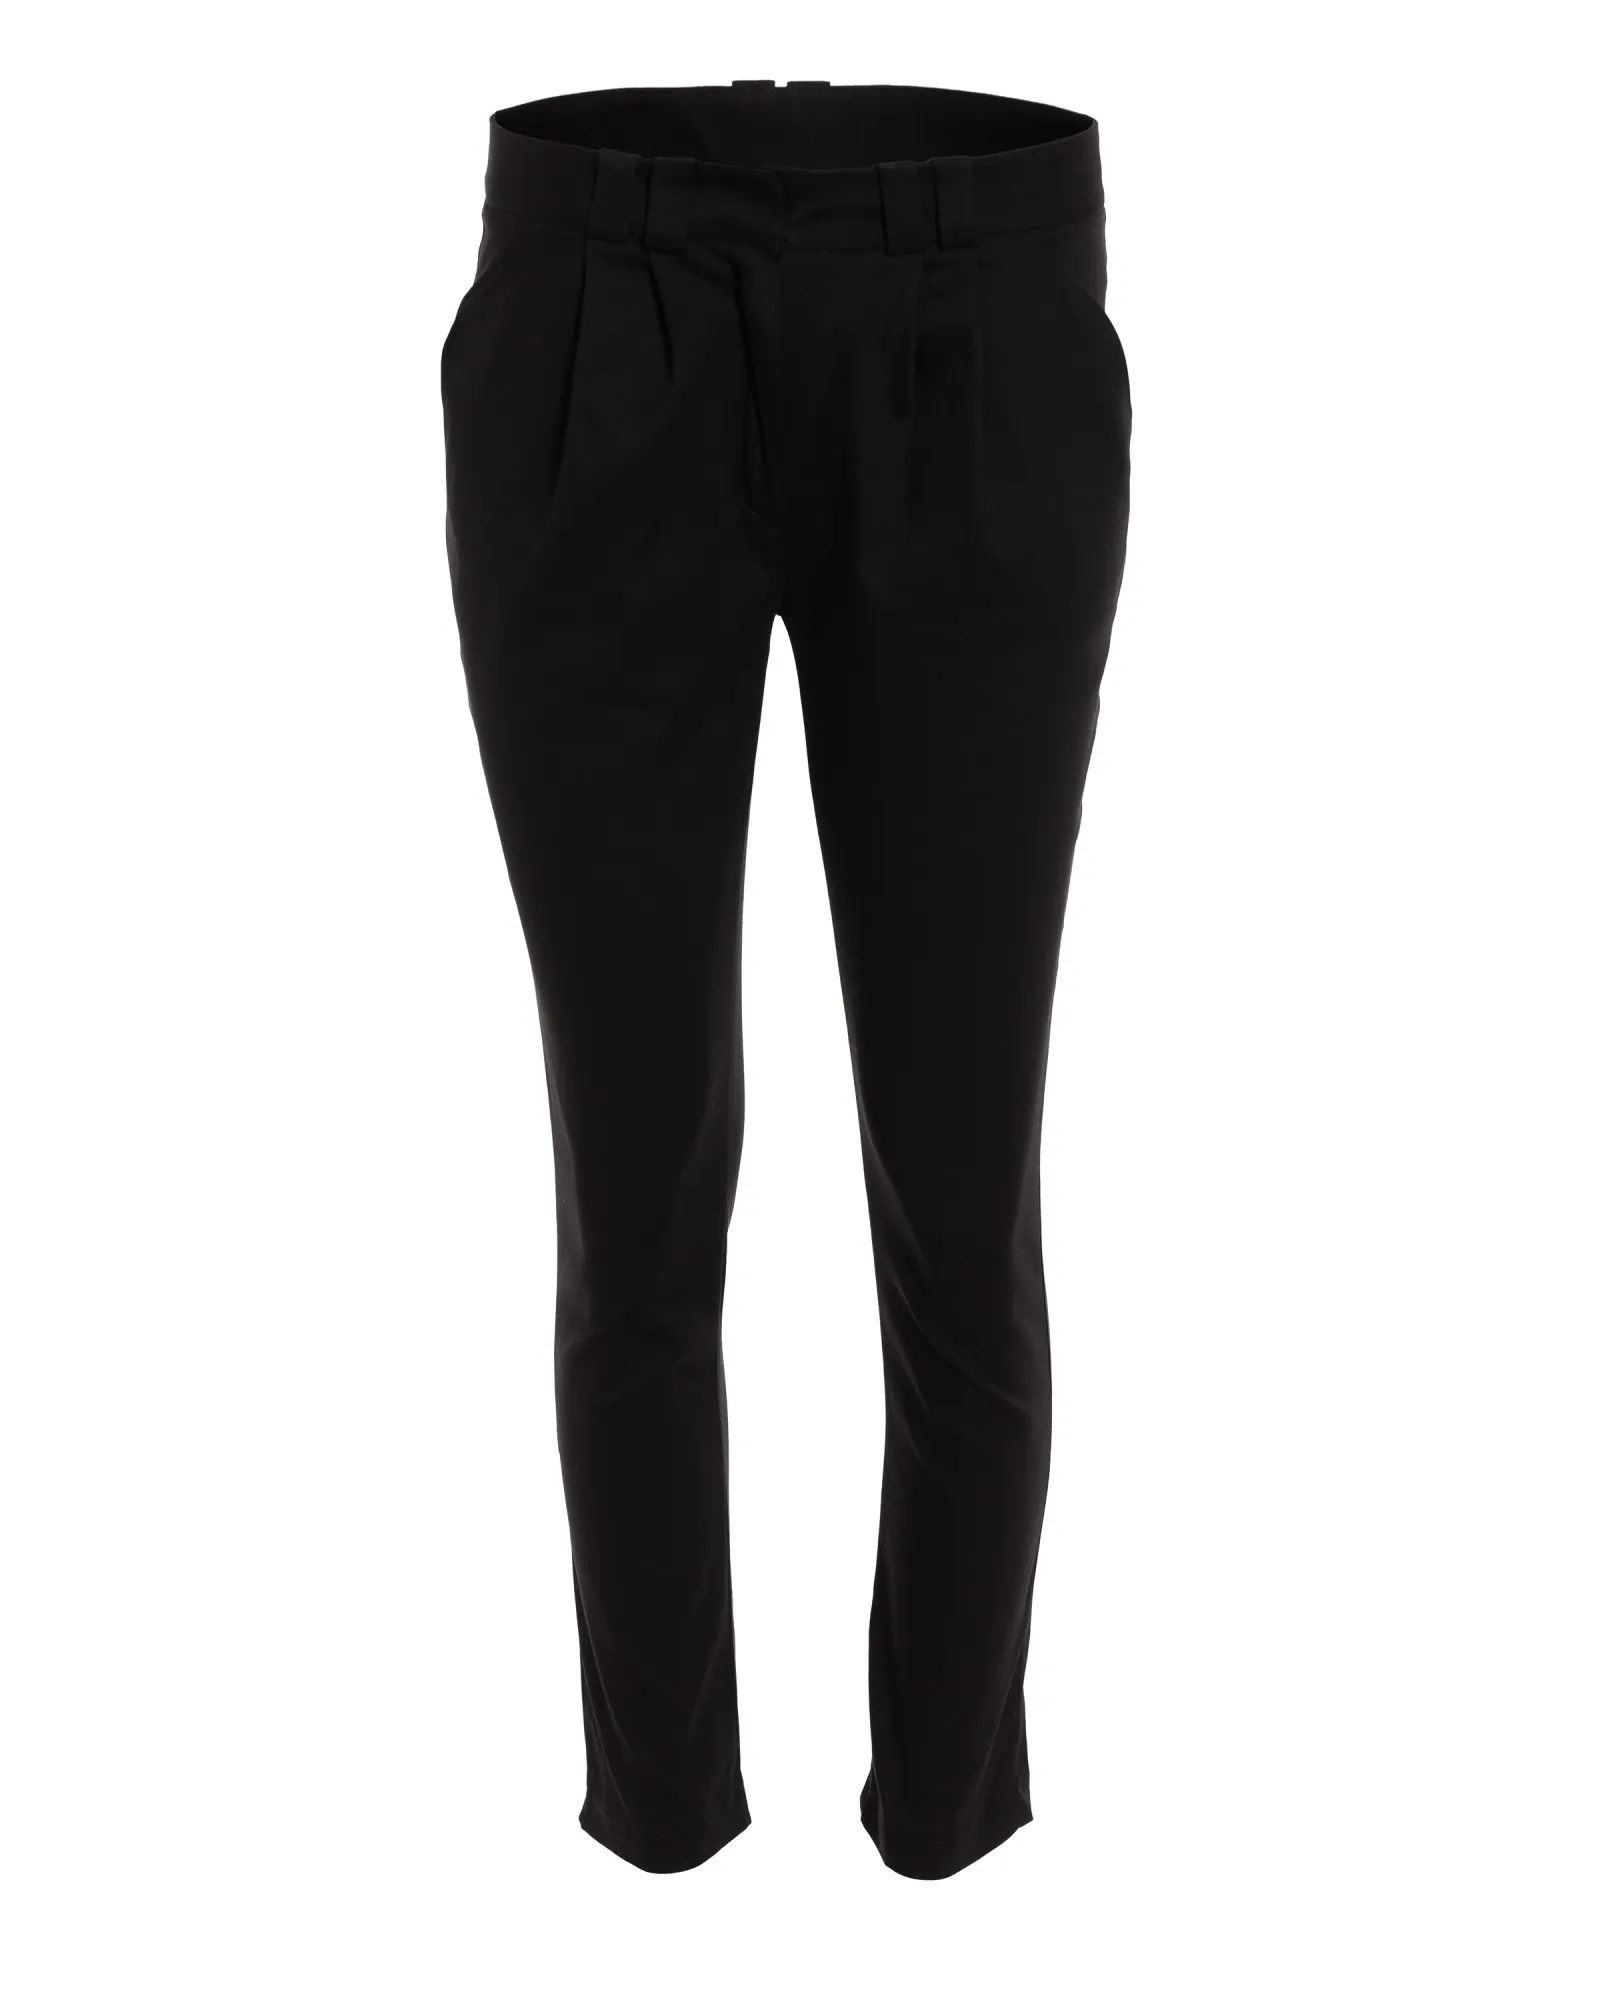 Fitted womens trousers - black